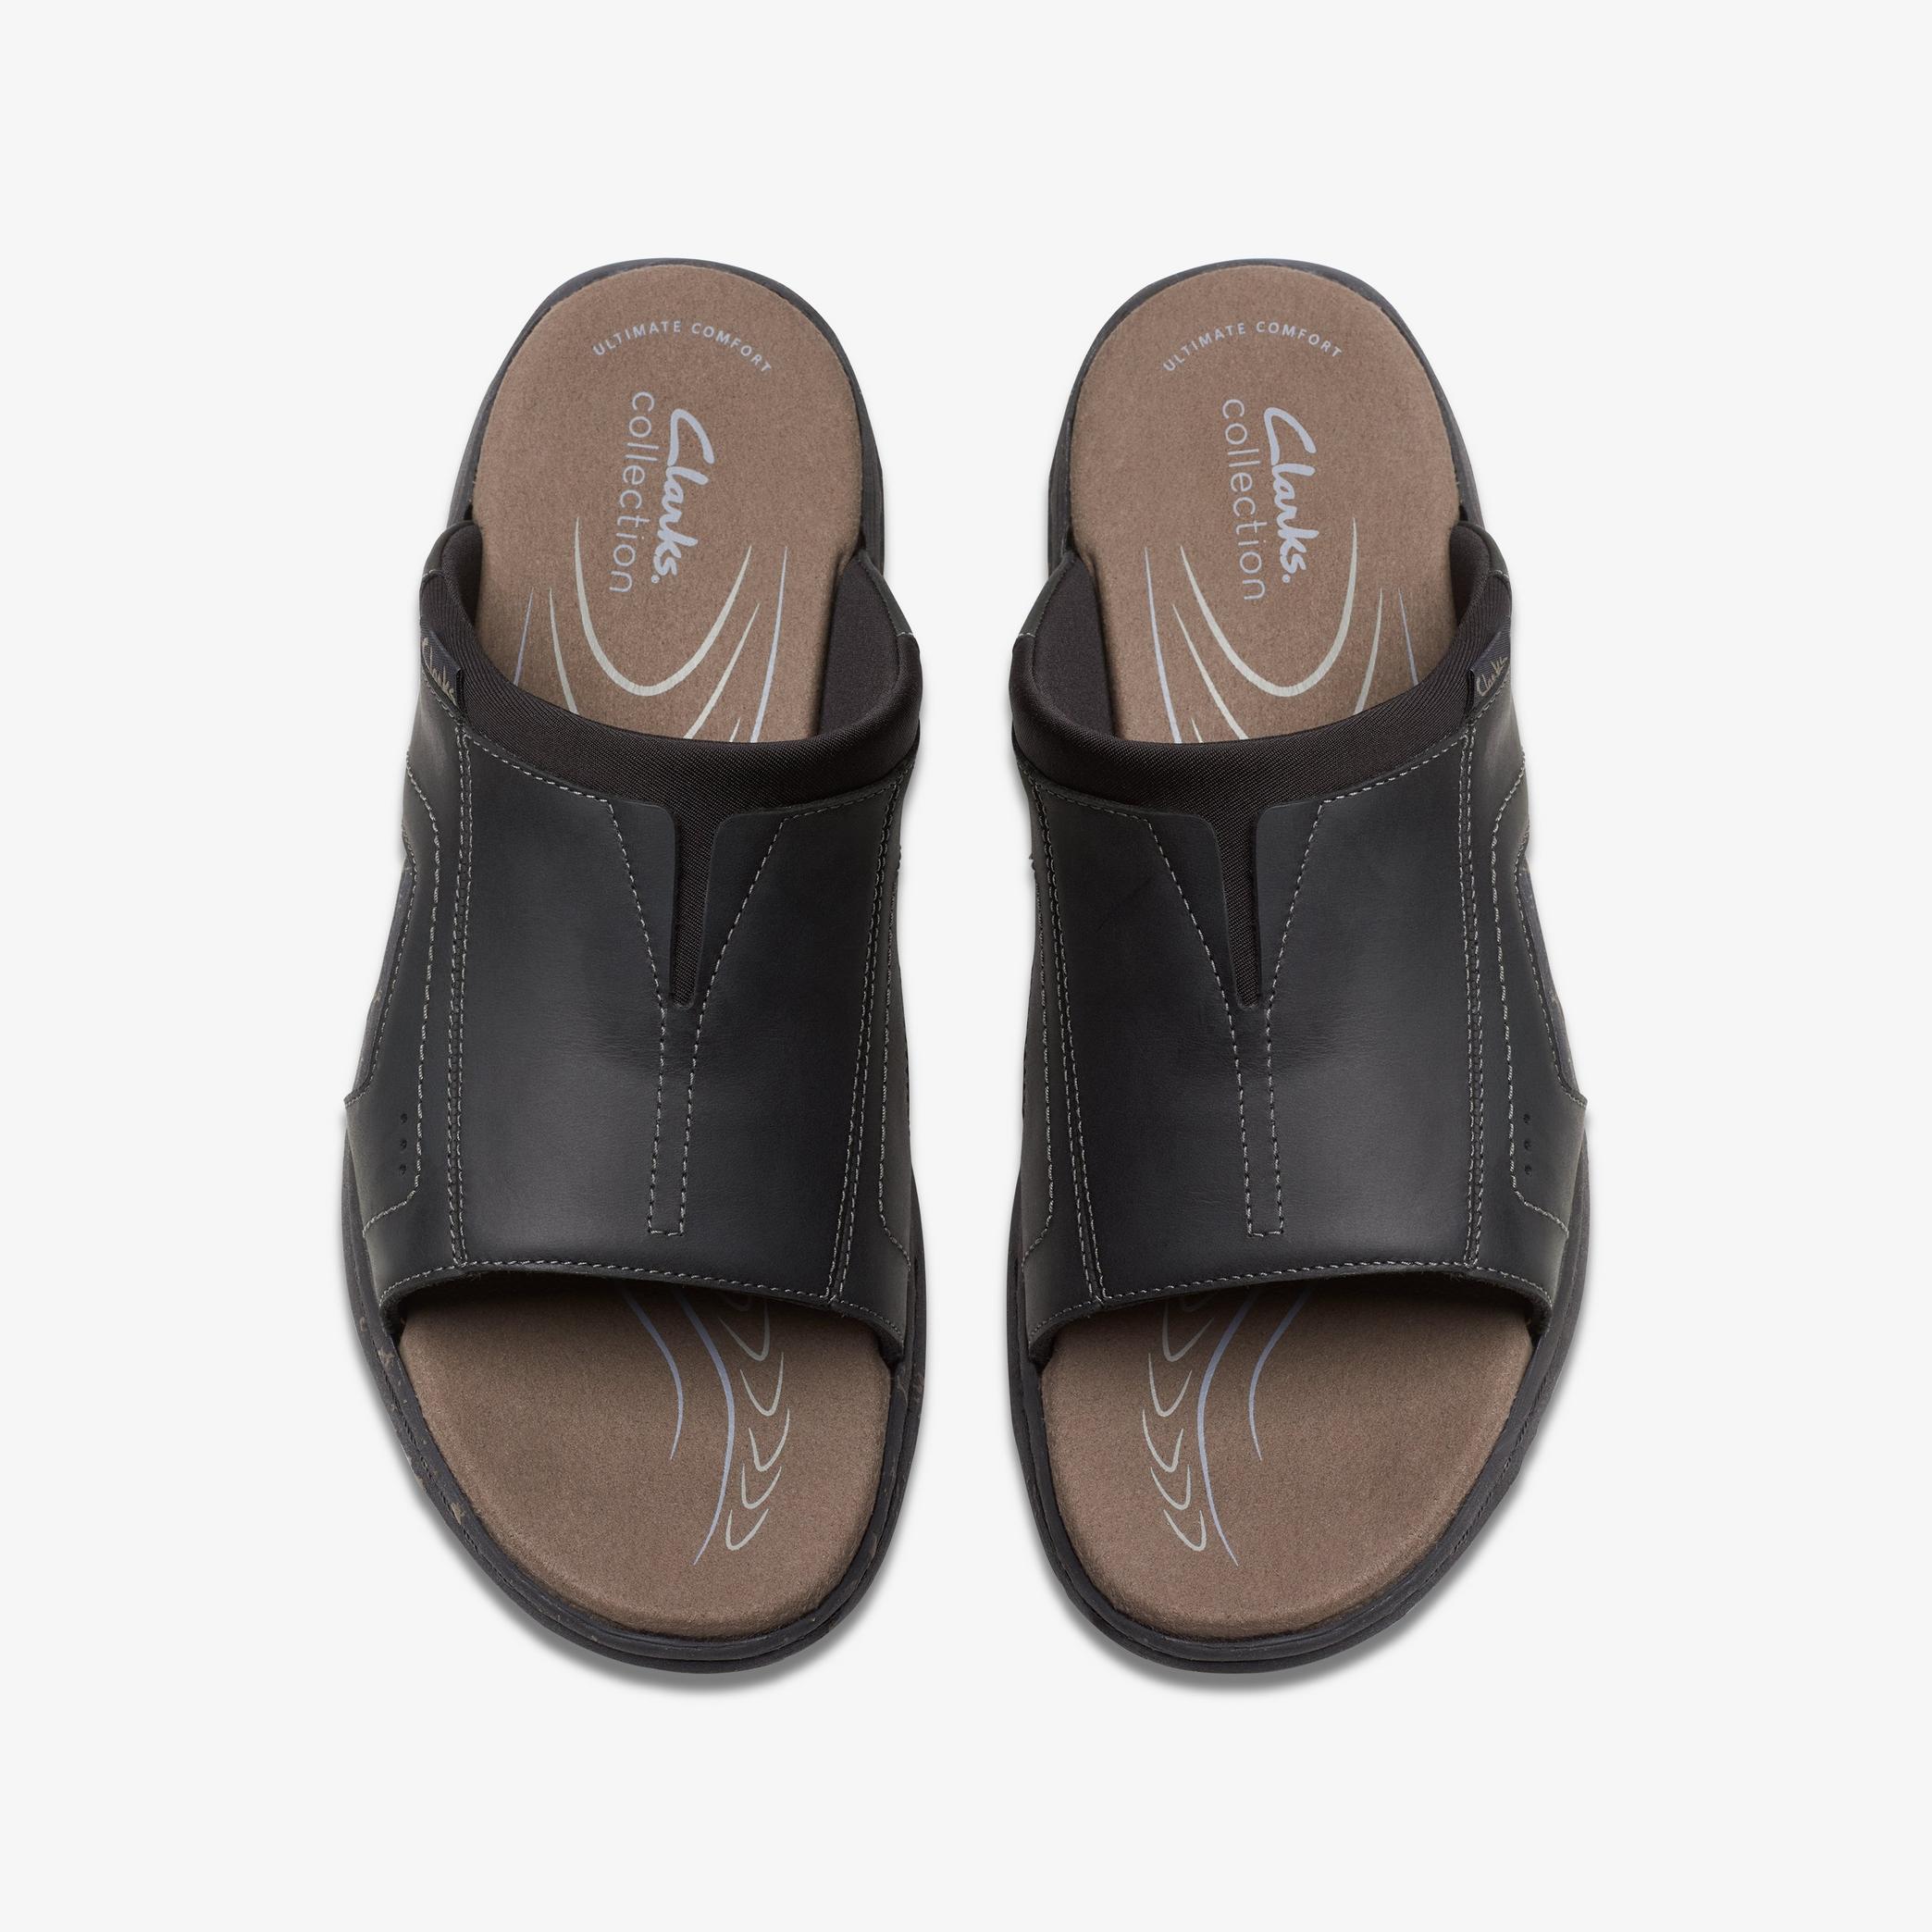 Walkford Band Black Leather Flat Sandals, view 6 of 6